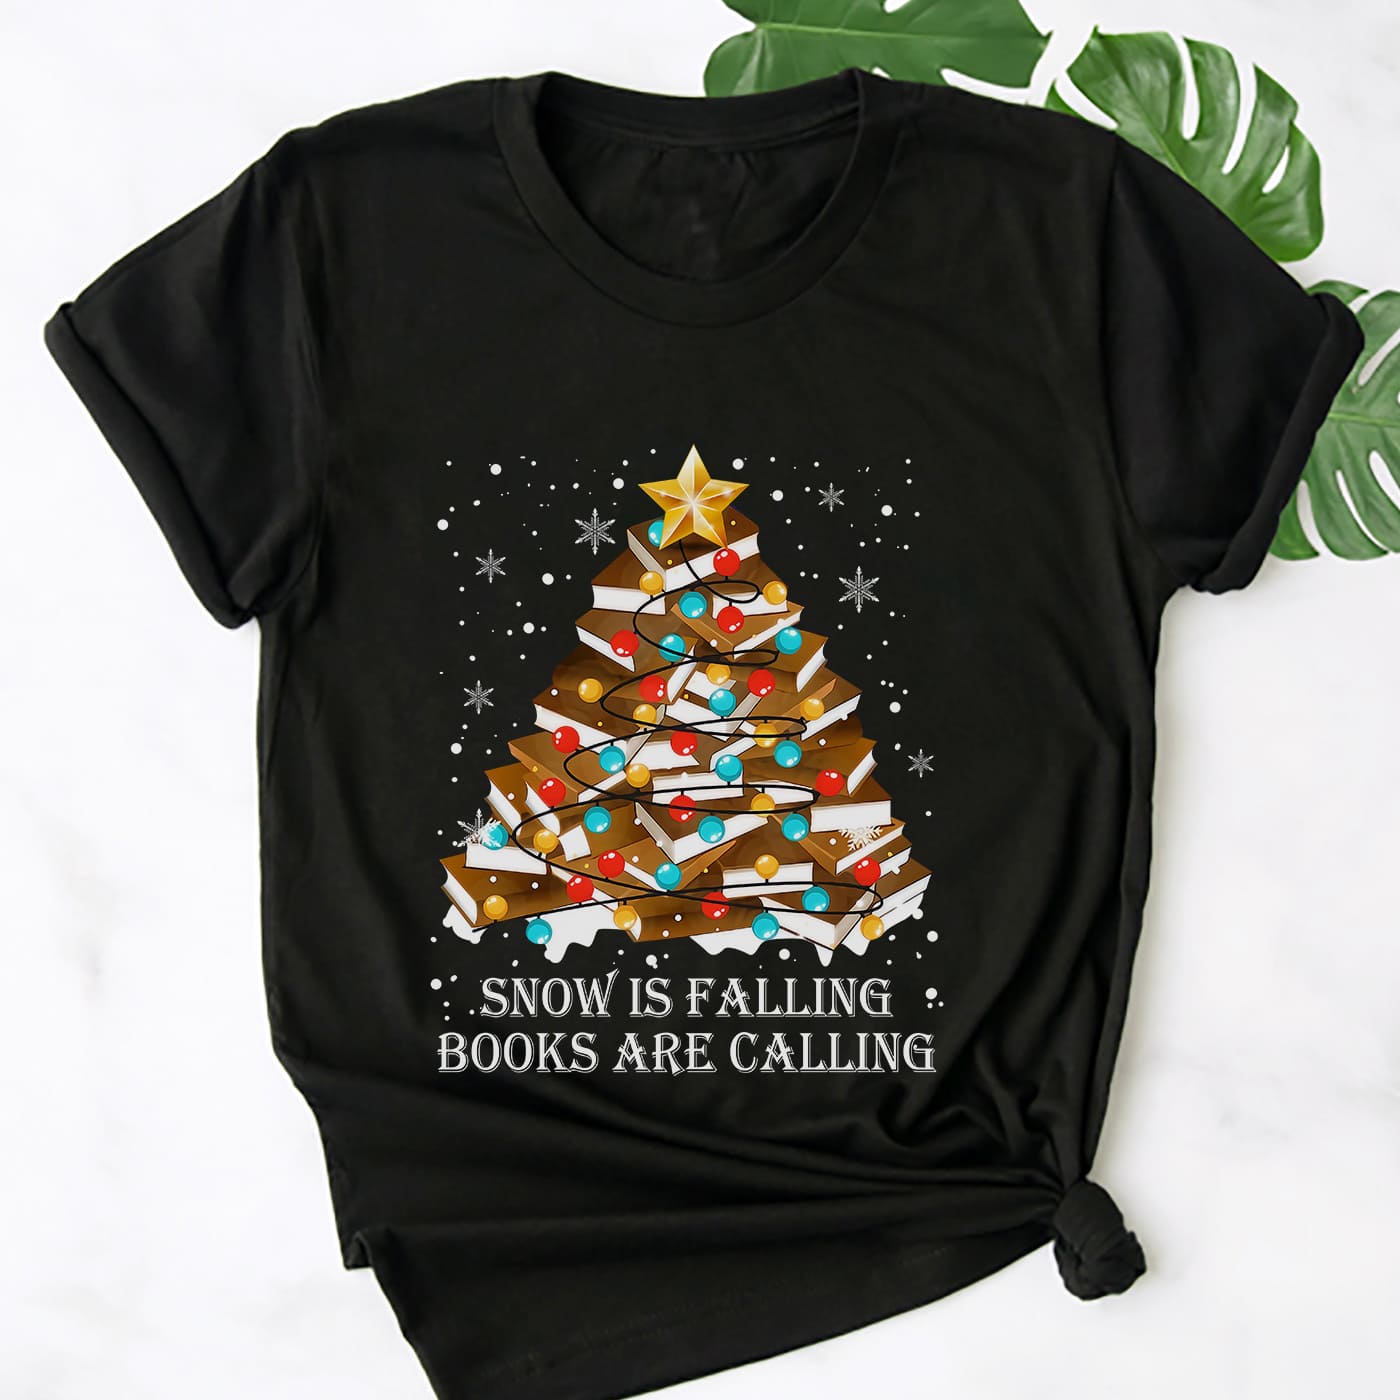 Snow is falling, books are calling - Chrismas book tree, Merry Christmas T-shirt